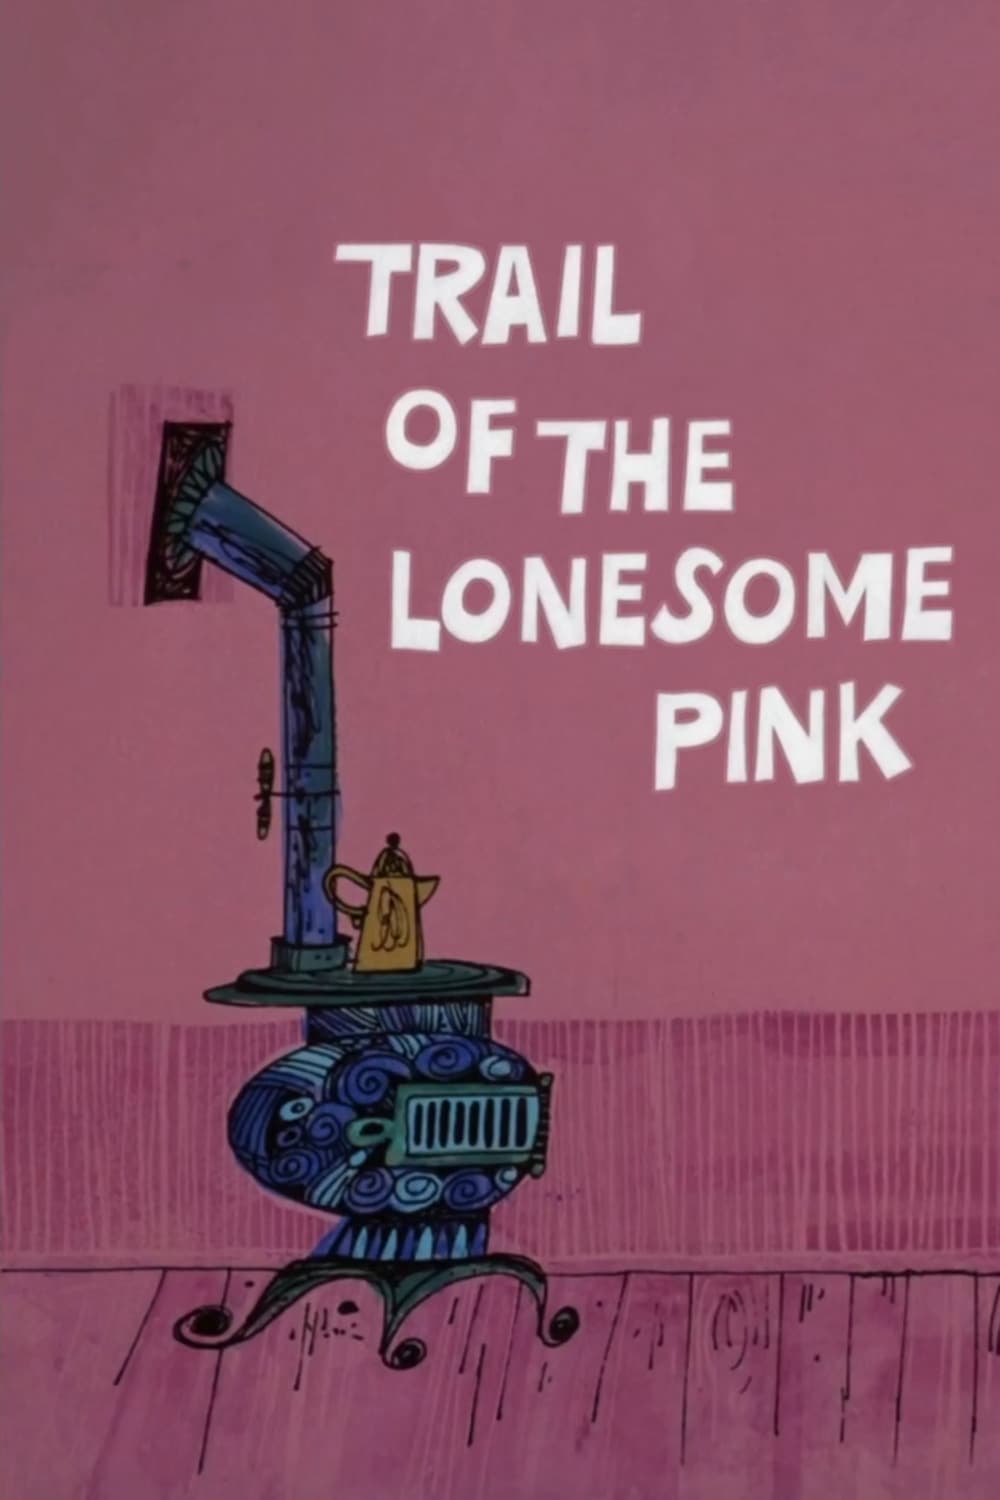 Trail of the Lonesome Pink (1974)